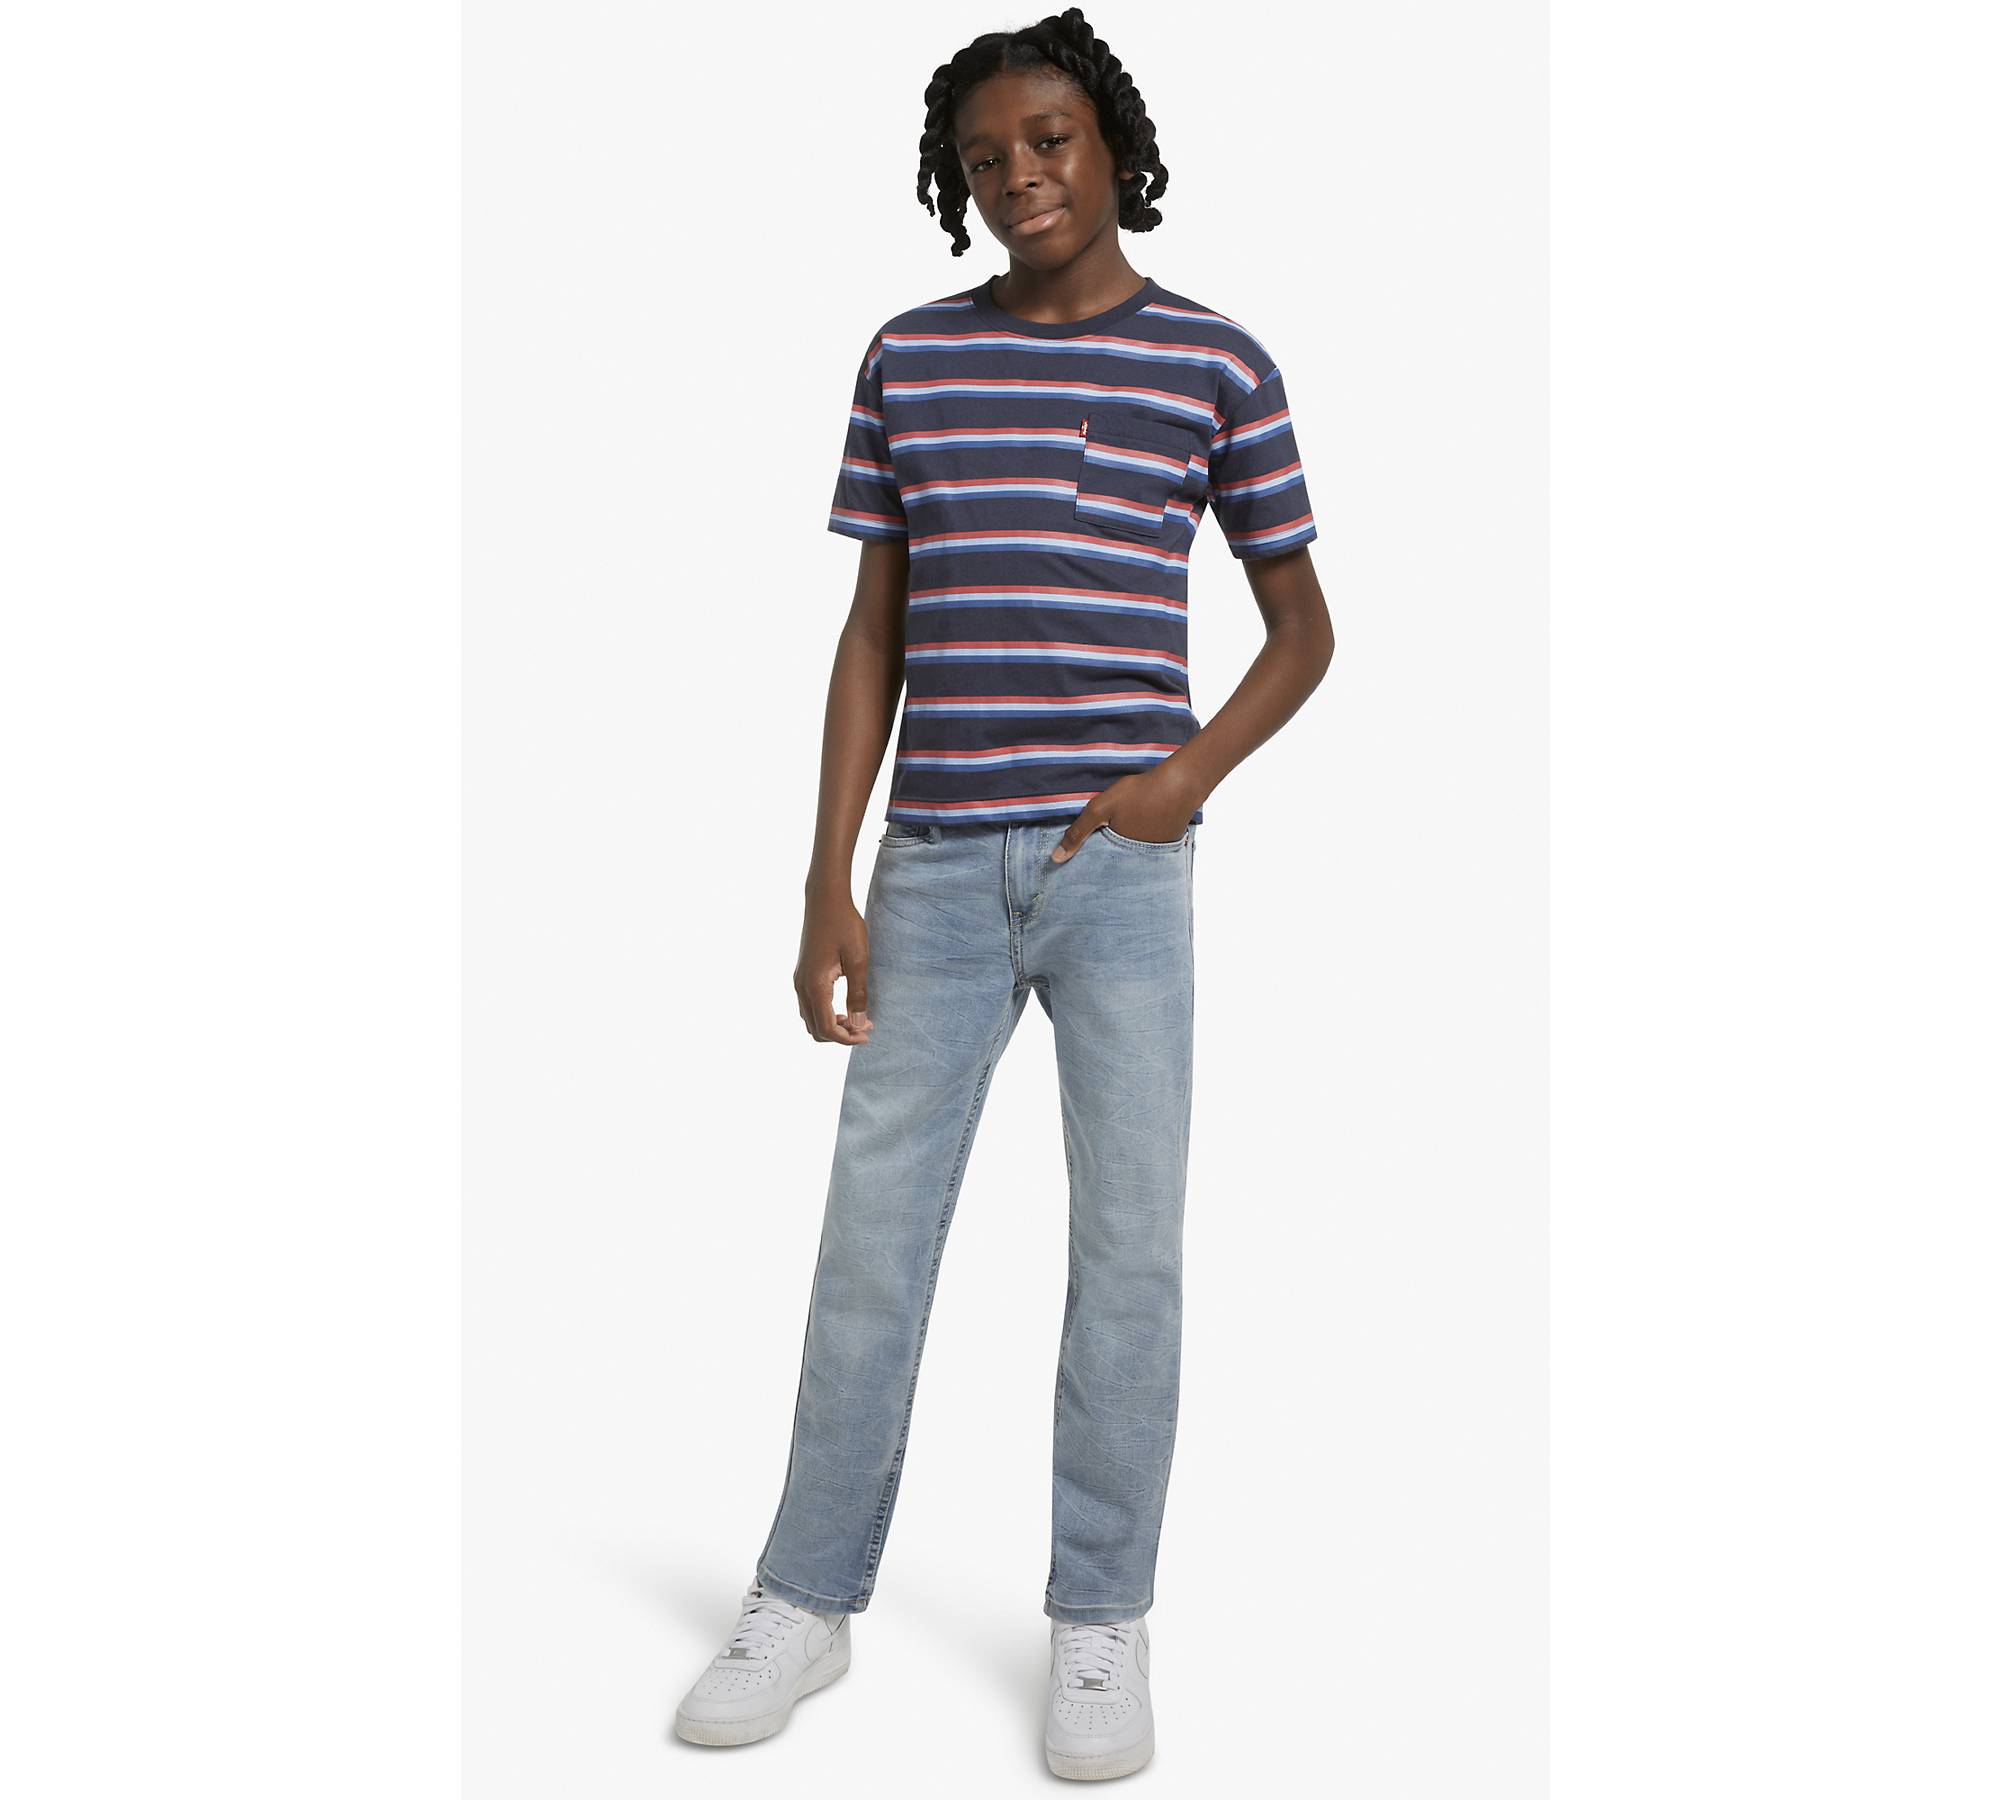 502™ Taper Fit Strong Performance Big Boys Jeans 8-20 1